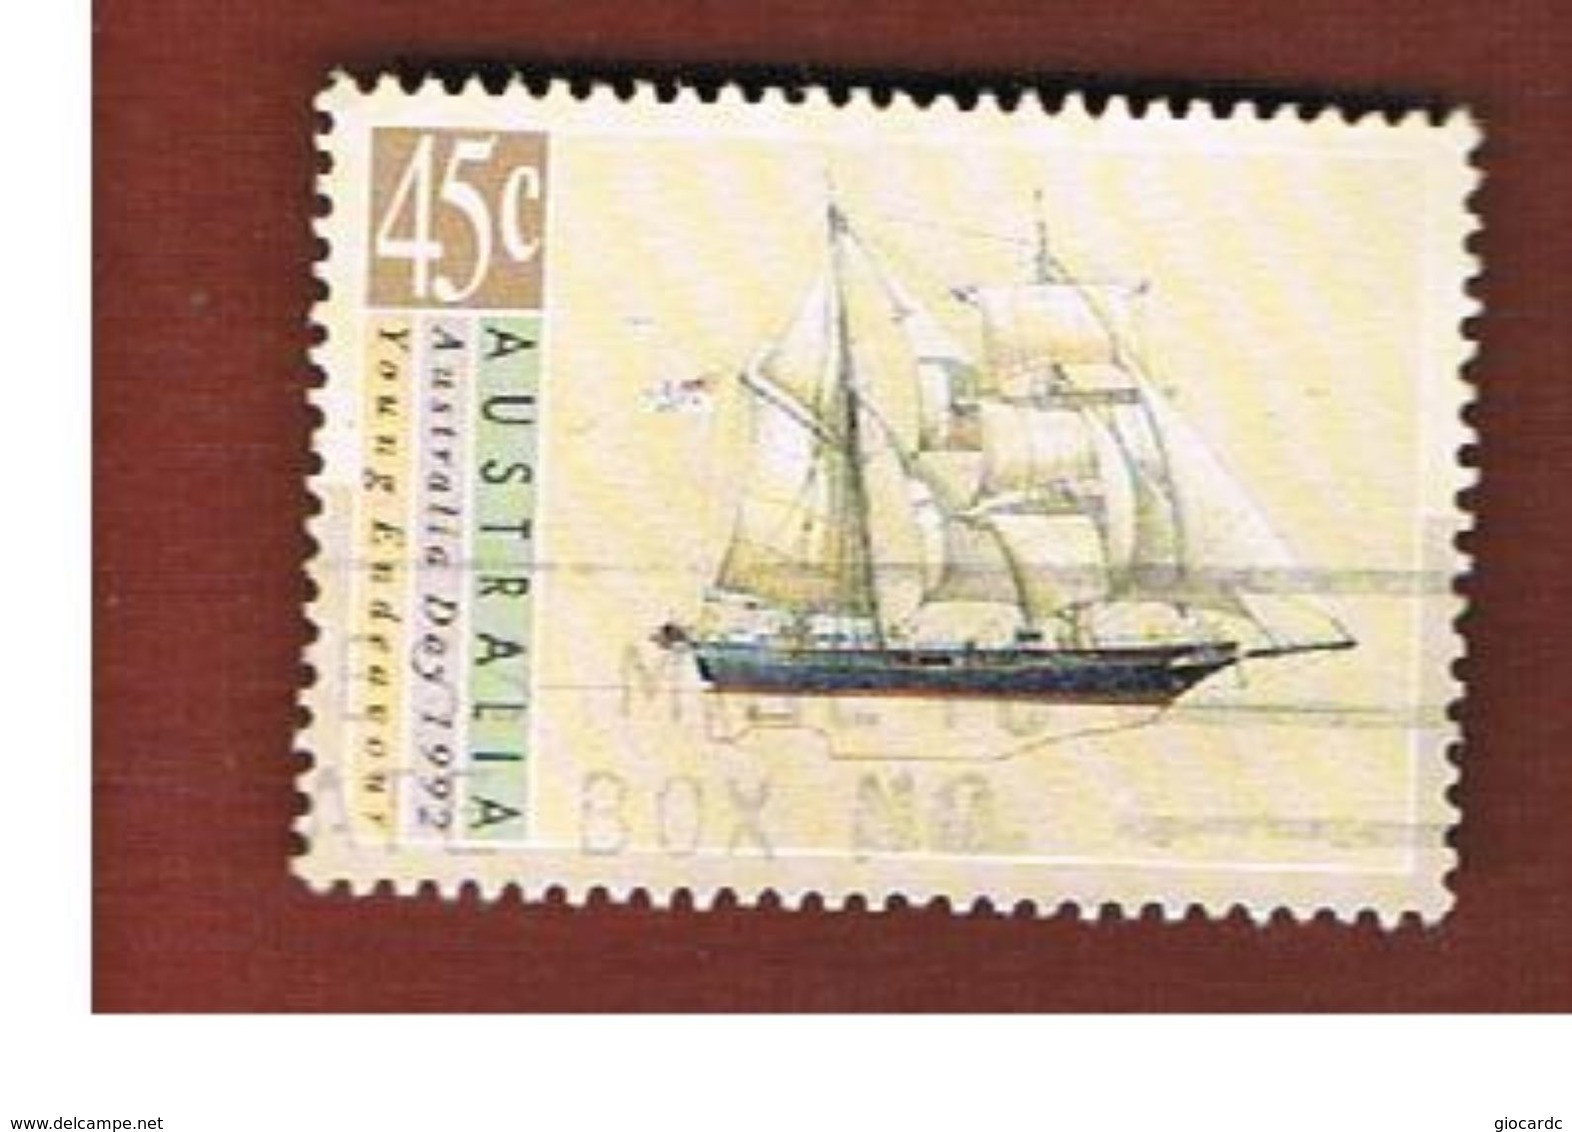 AUSTRALIA  -  SG 1333  -      1992 SHIPS: YOUNG ENDEAVOUR           -       USED - Gebruikt